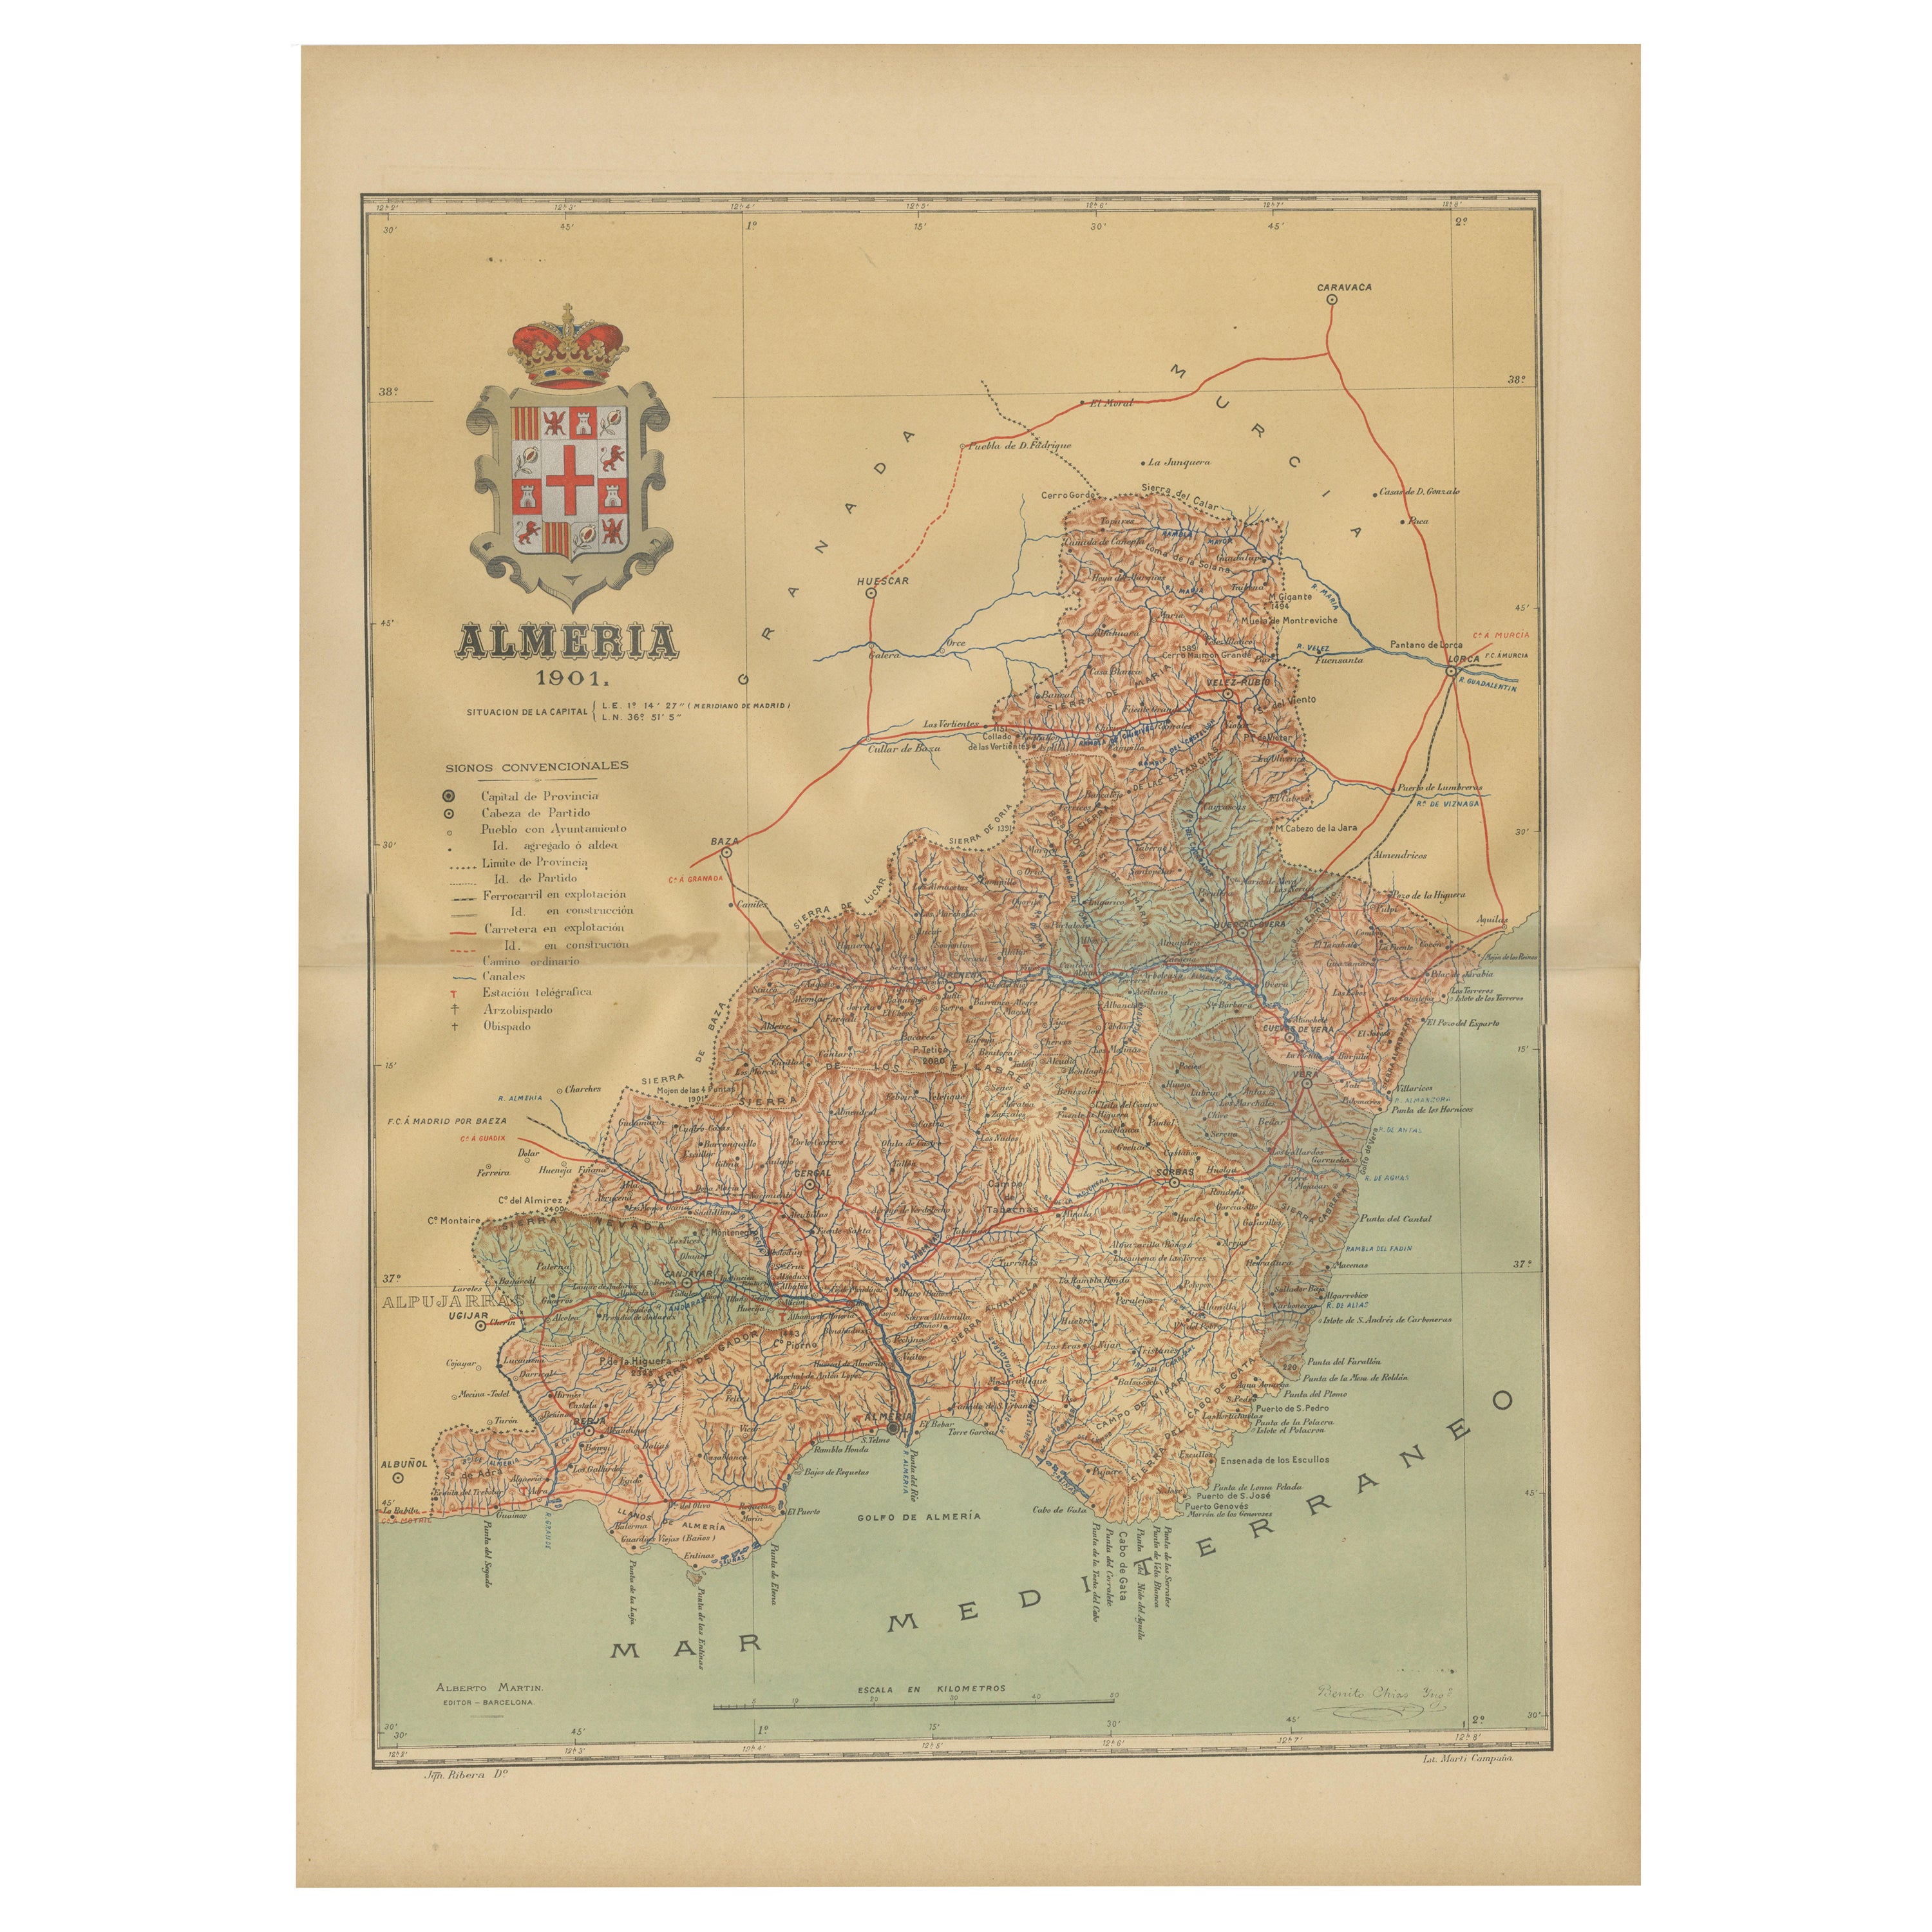 Almería 1901: Coastal Contours and Landscapes in a Map of Southeastern Spain For Sale